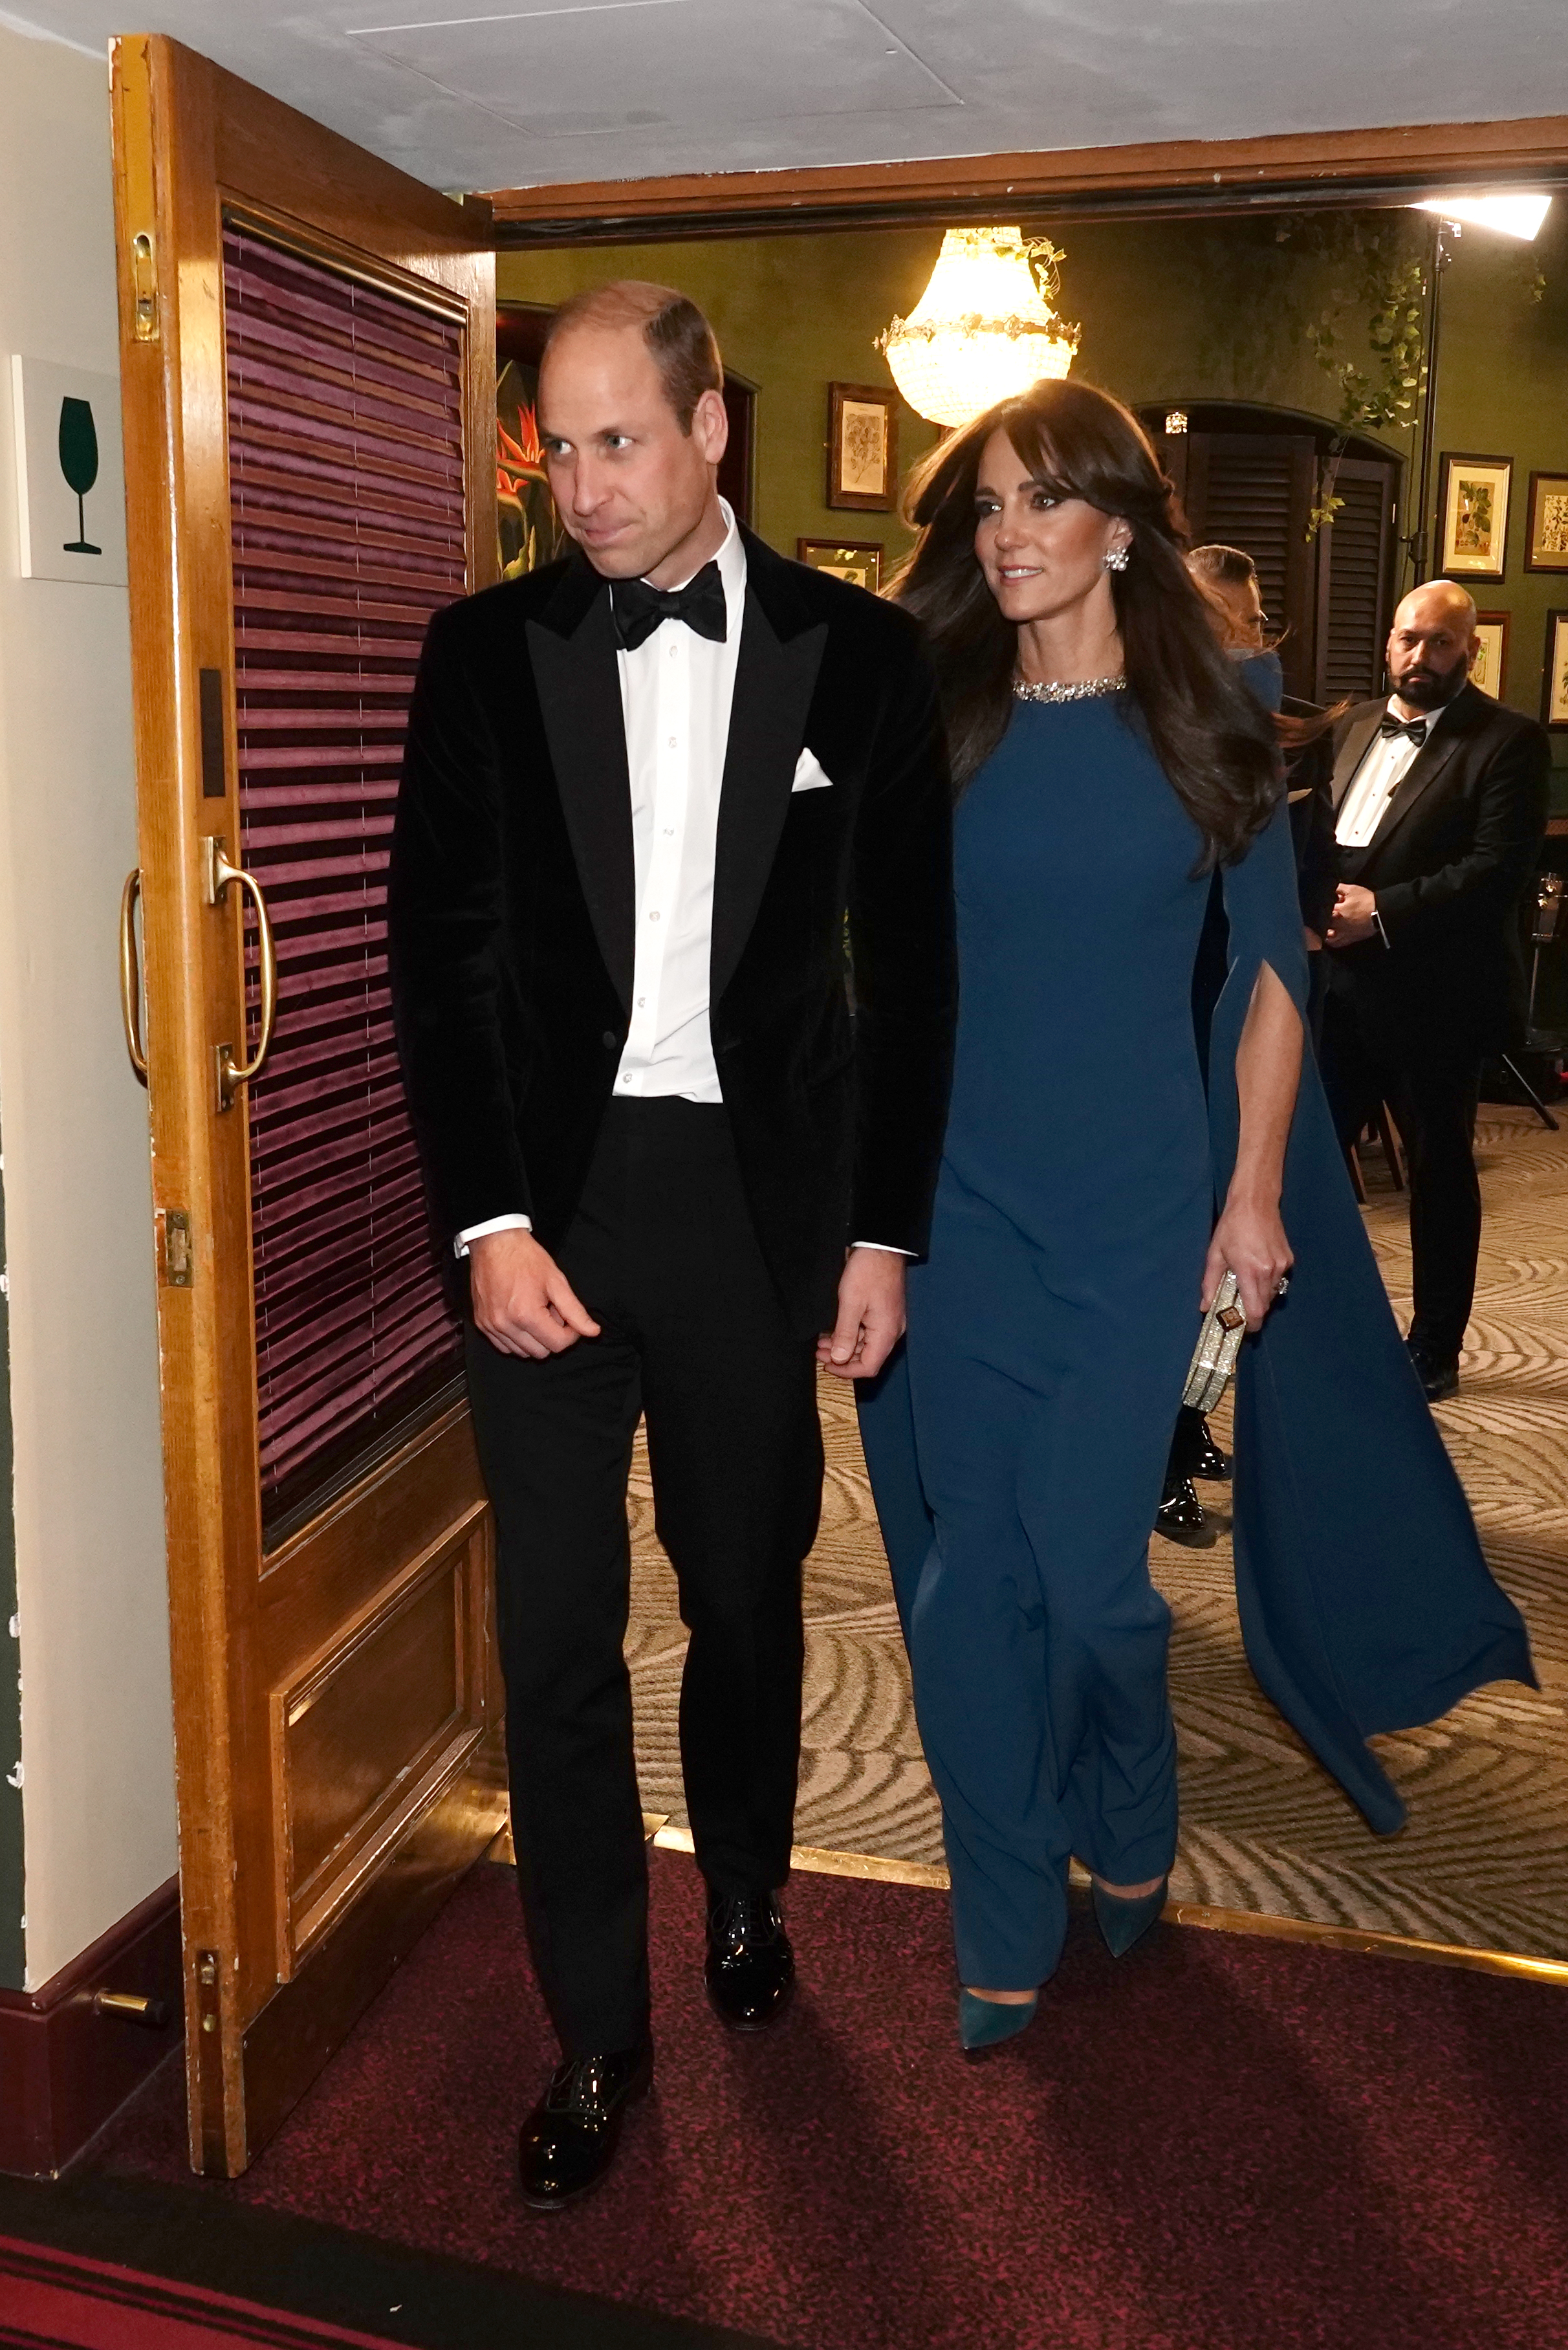 Prince William and Princess Catherine at the Royal Variety Performance in London, England on November 30, 2023 | Source: Getty Images